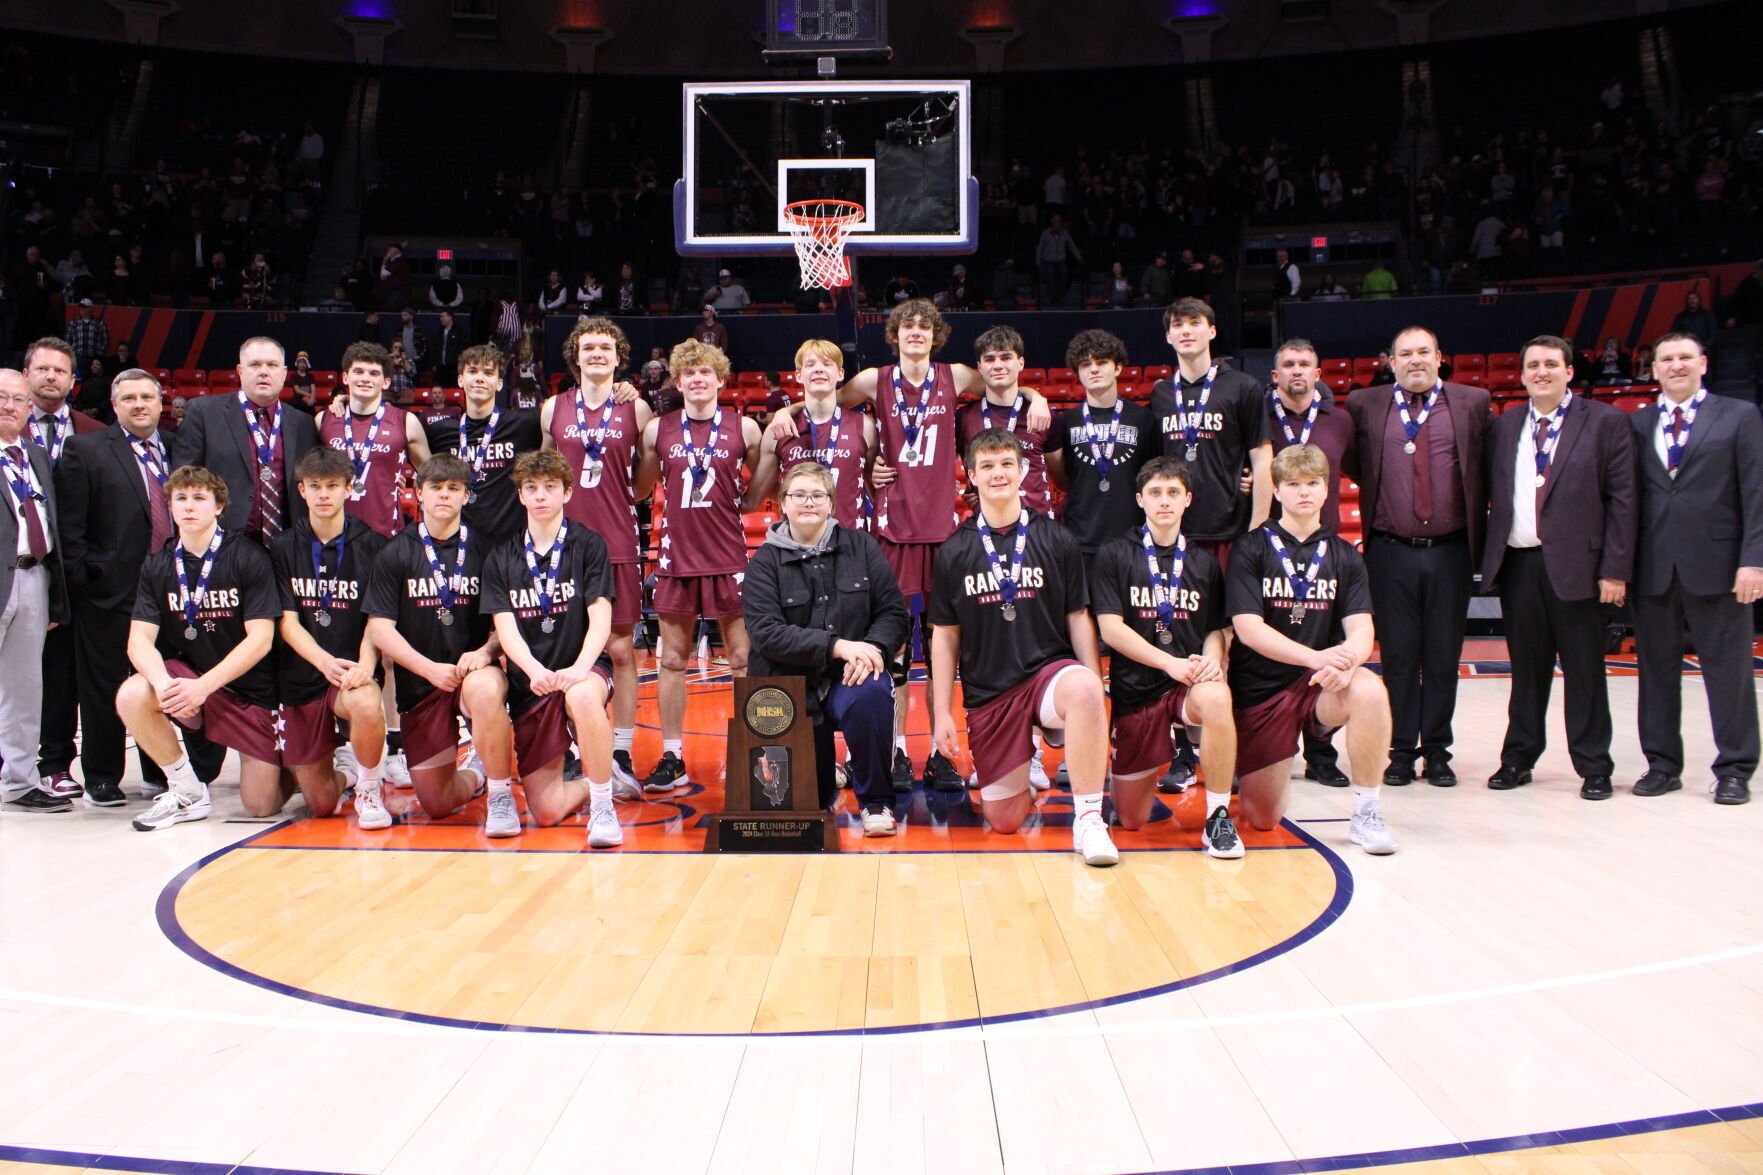 Magical season ends for Benton in state finals